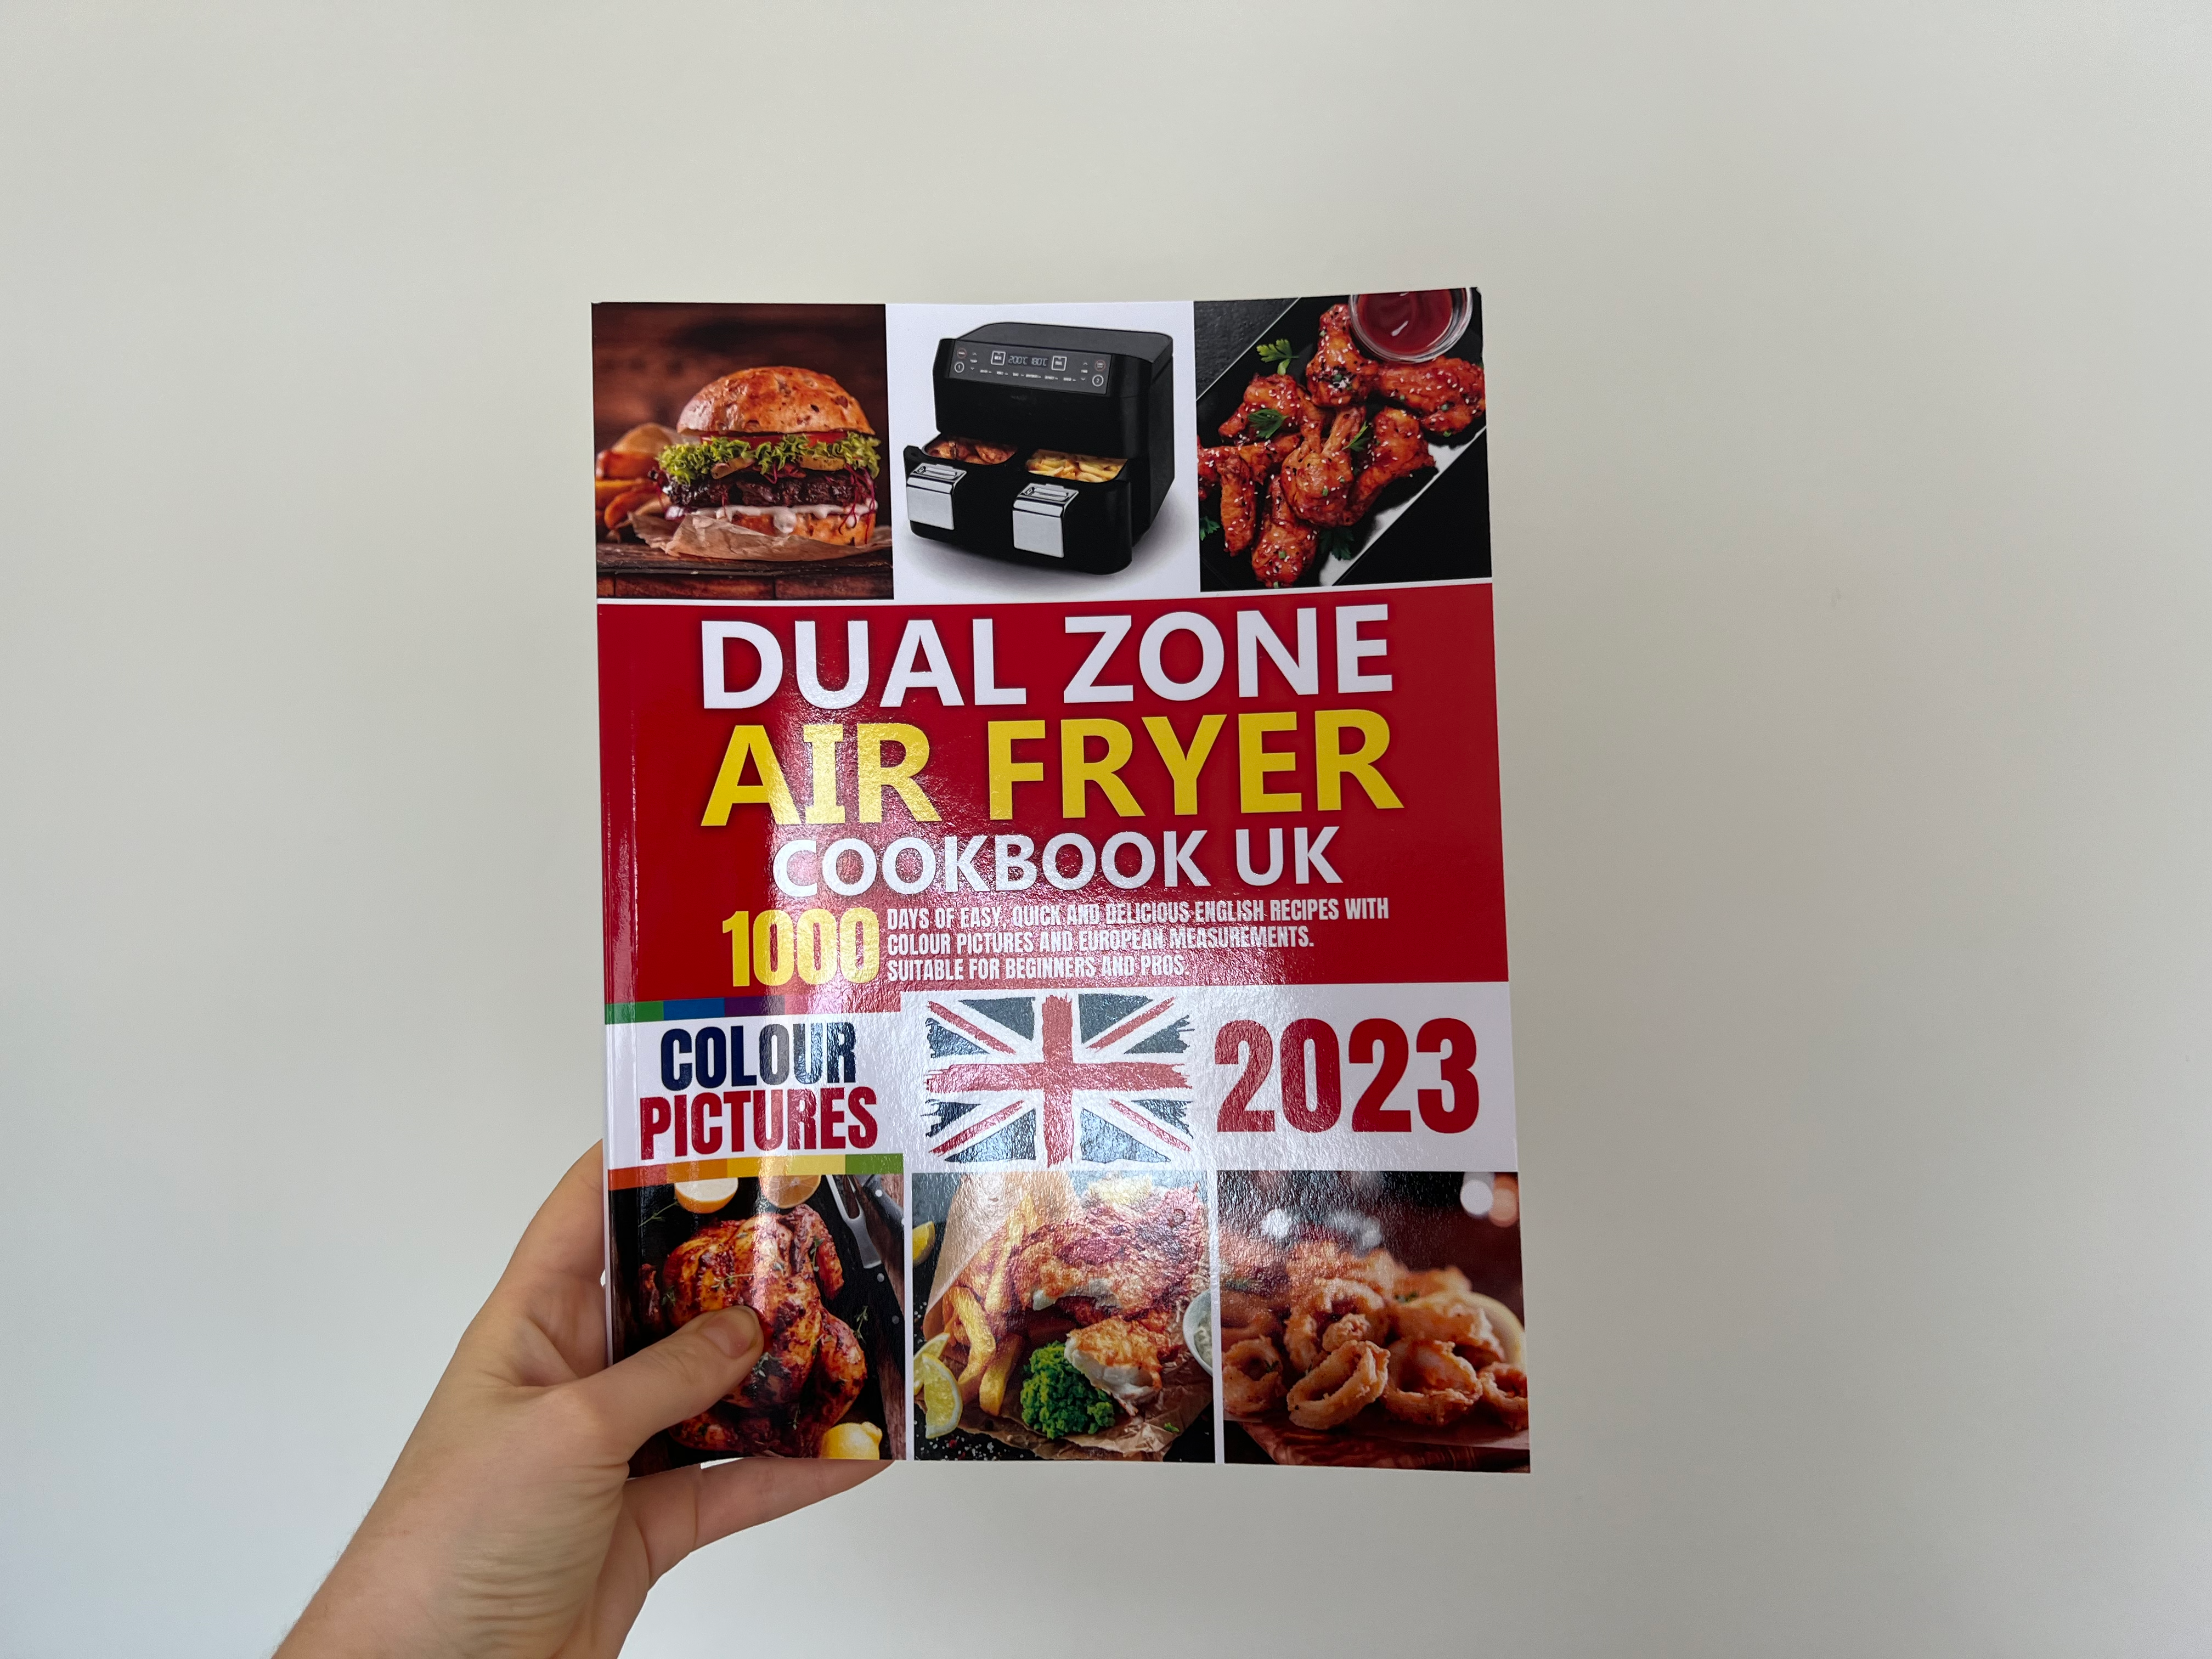 https://static.independent.co.uk/2023/06/27/14/Dual-zone%20air%20fryer%20cookbook%20UK.png